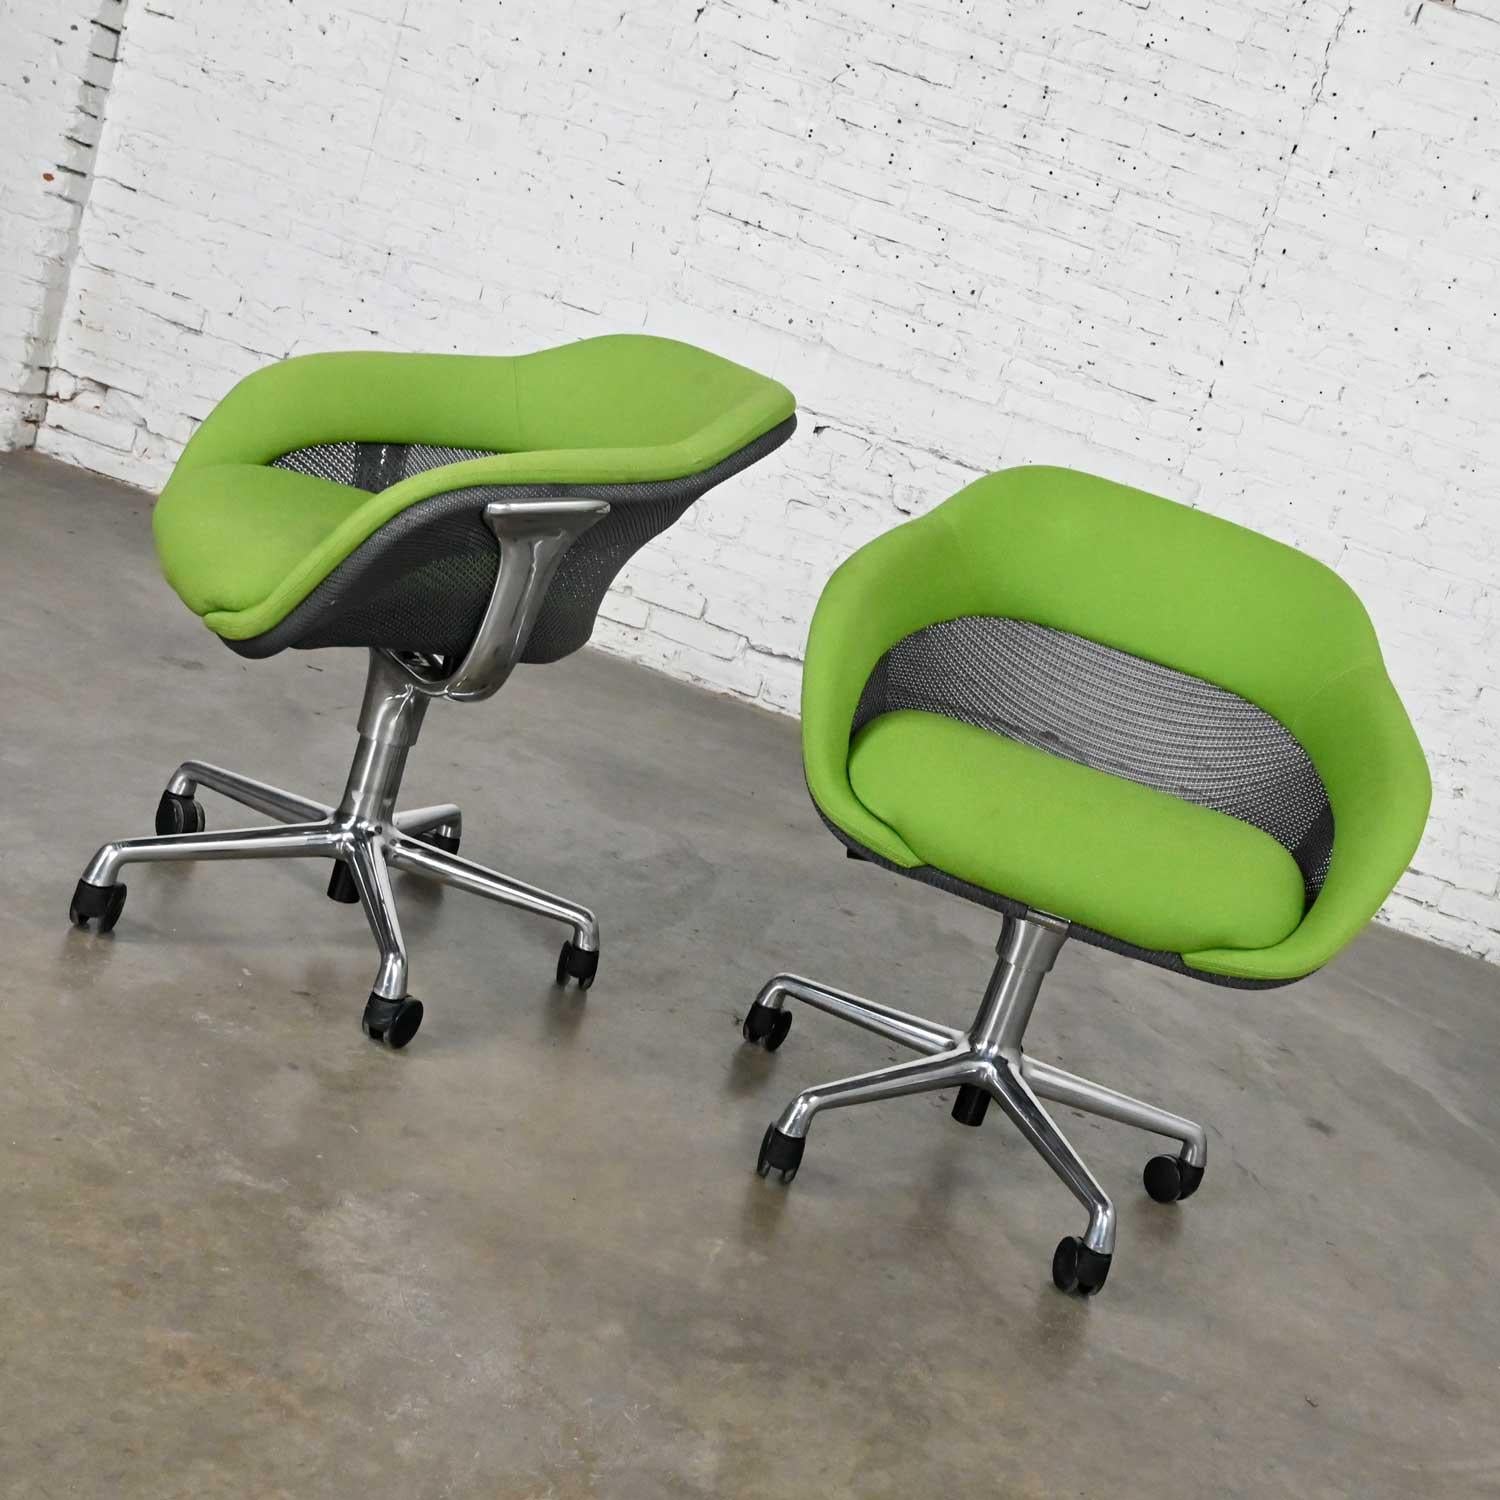 Awesome modern steelcase green mesh and five prong chrome rolling base pair of Coalesse office chairs. Beautiful condition, keeping in mind that these are vintage and not new so will have signs of use and wear. There is a snag in the webbing on one